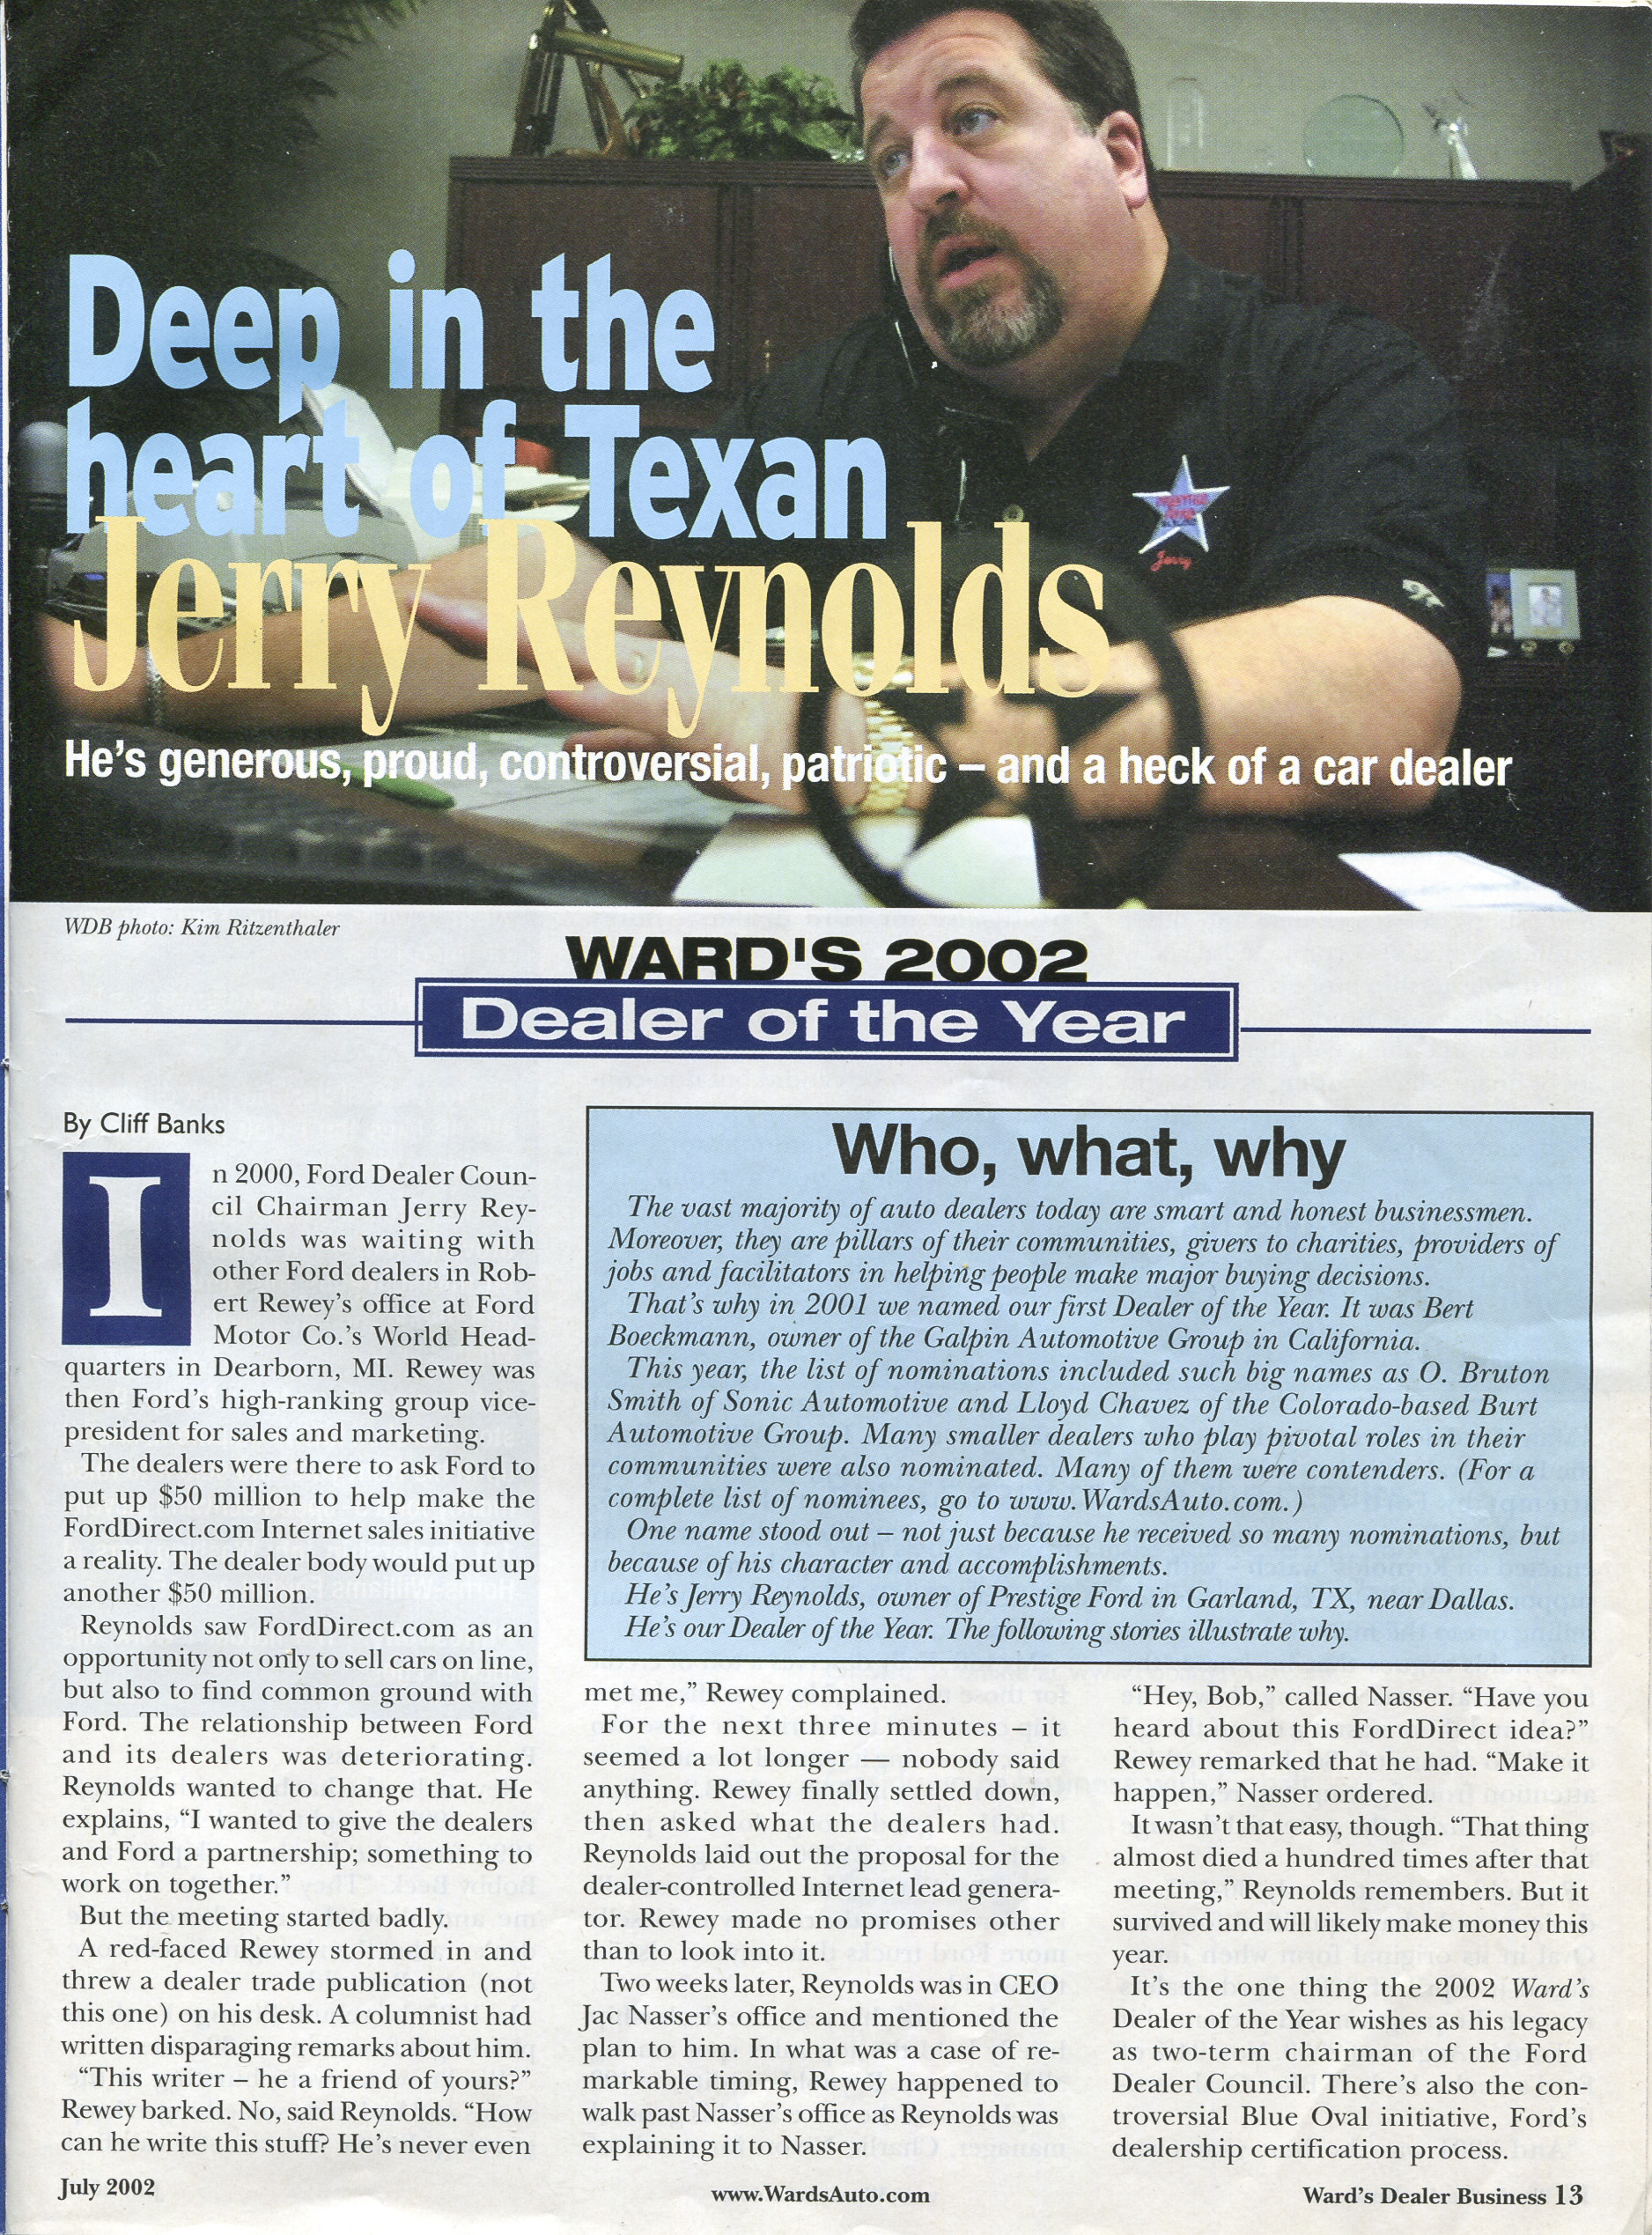 jerry-wards-auto-page2